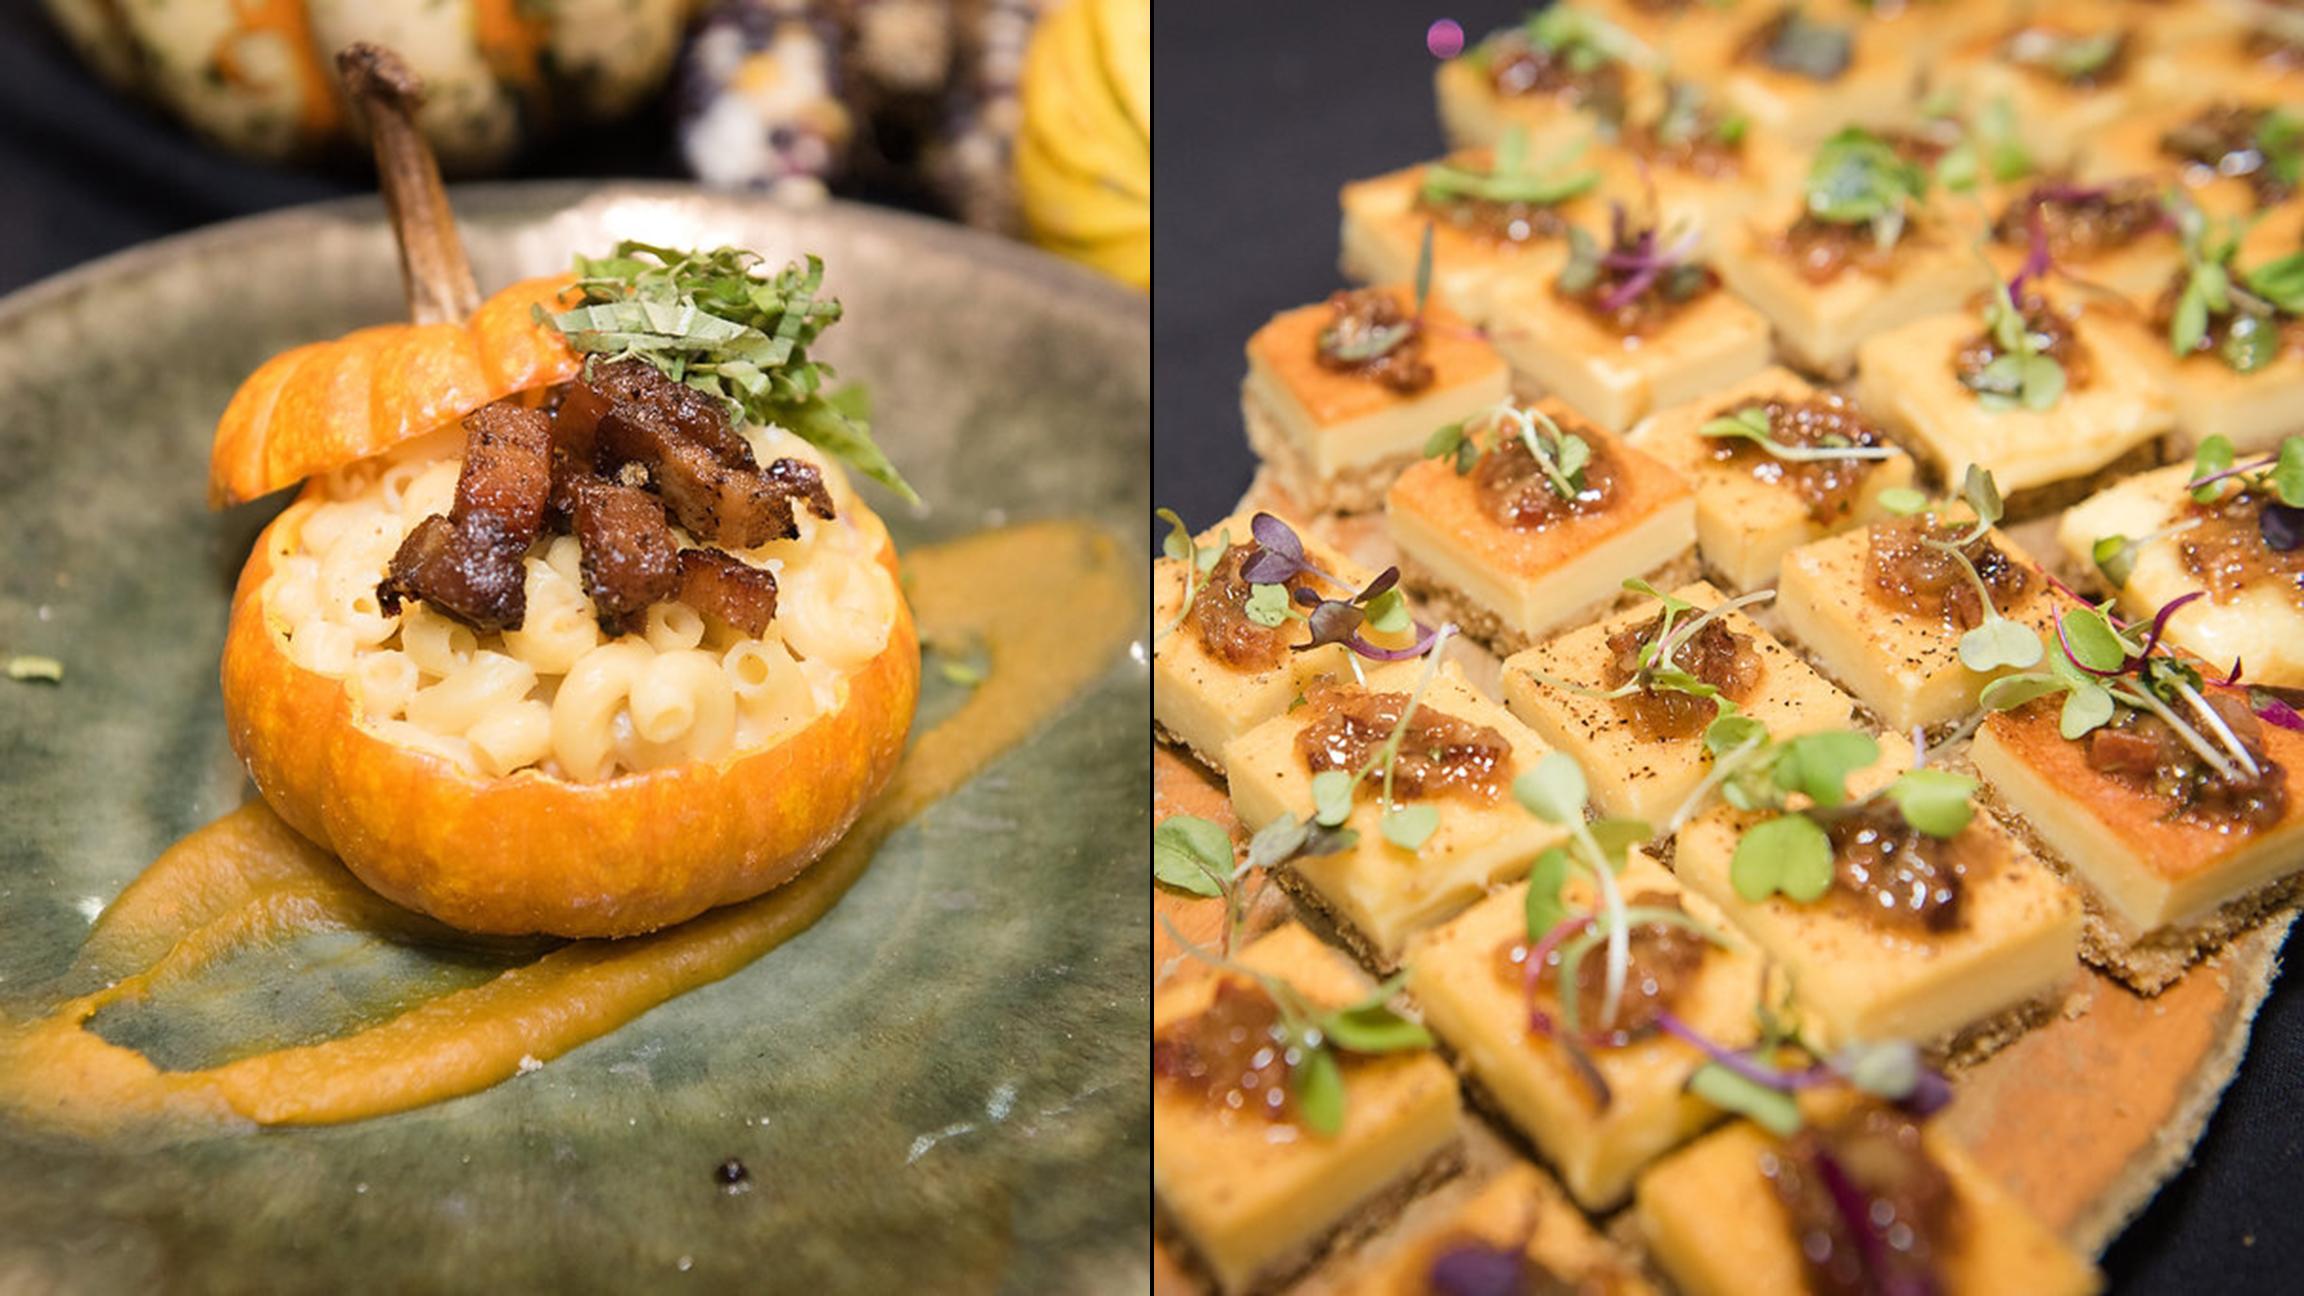 Not your mama’s mac ‘n’ cheese: Gourmet options galore at this weekend’s food fest. (Courtesy of Mac & Cheese Fest Chicago)